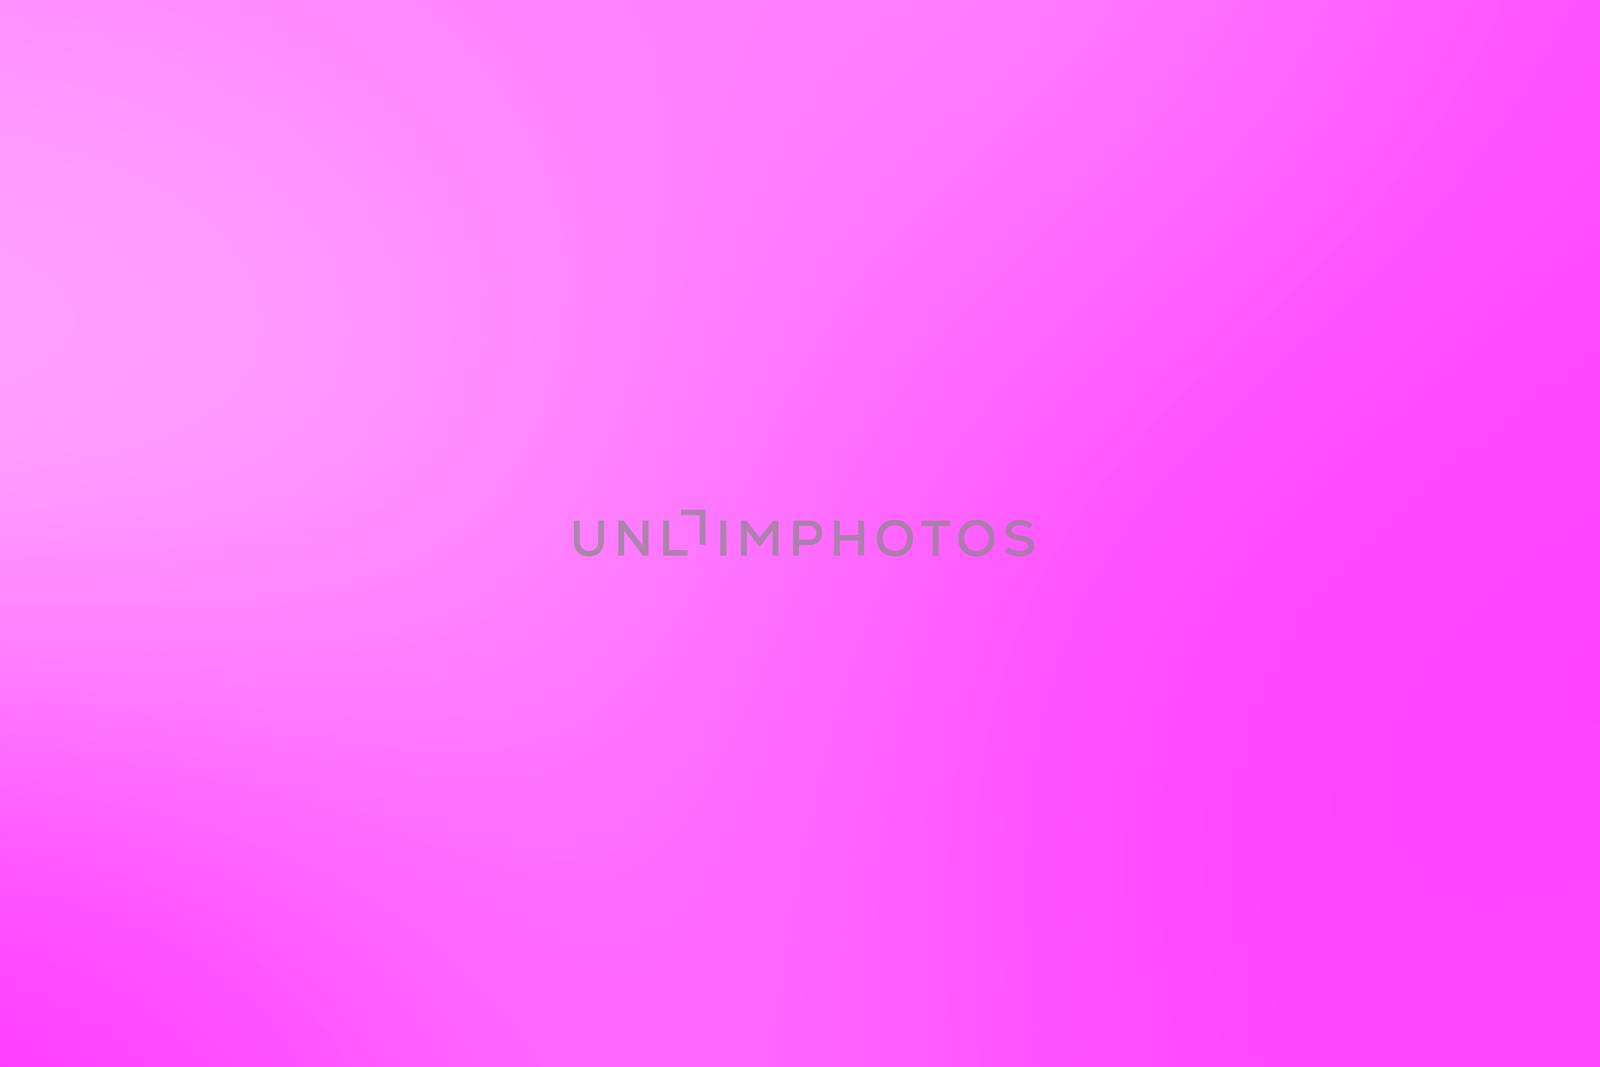 blurred soft purple gradient colorful light shade background